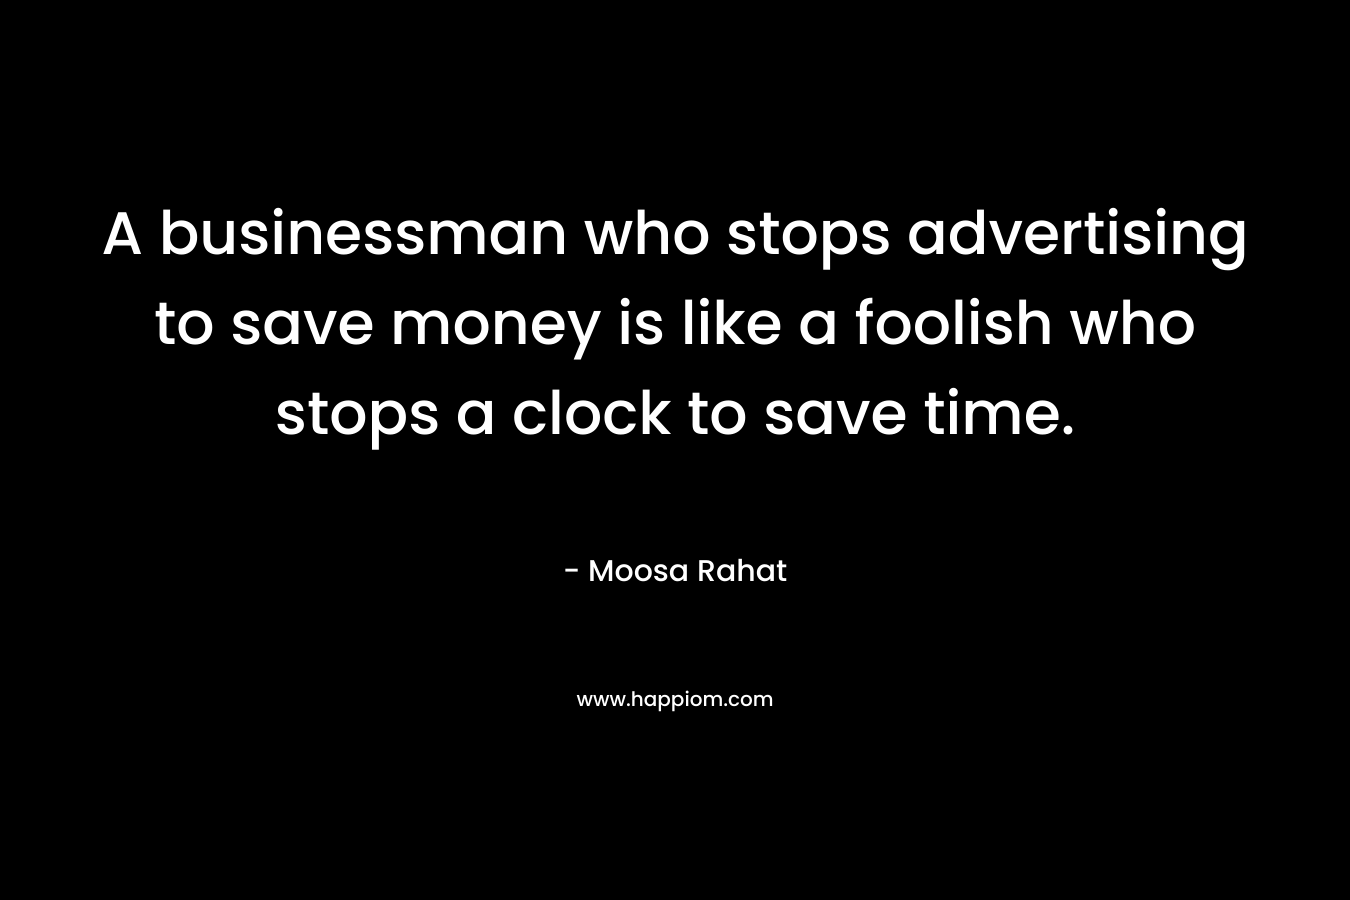 A businessman who stops advertising to save money is like a foolish who stops a clock to save time.